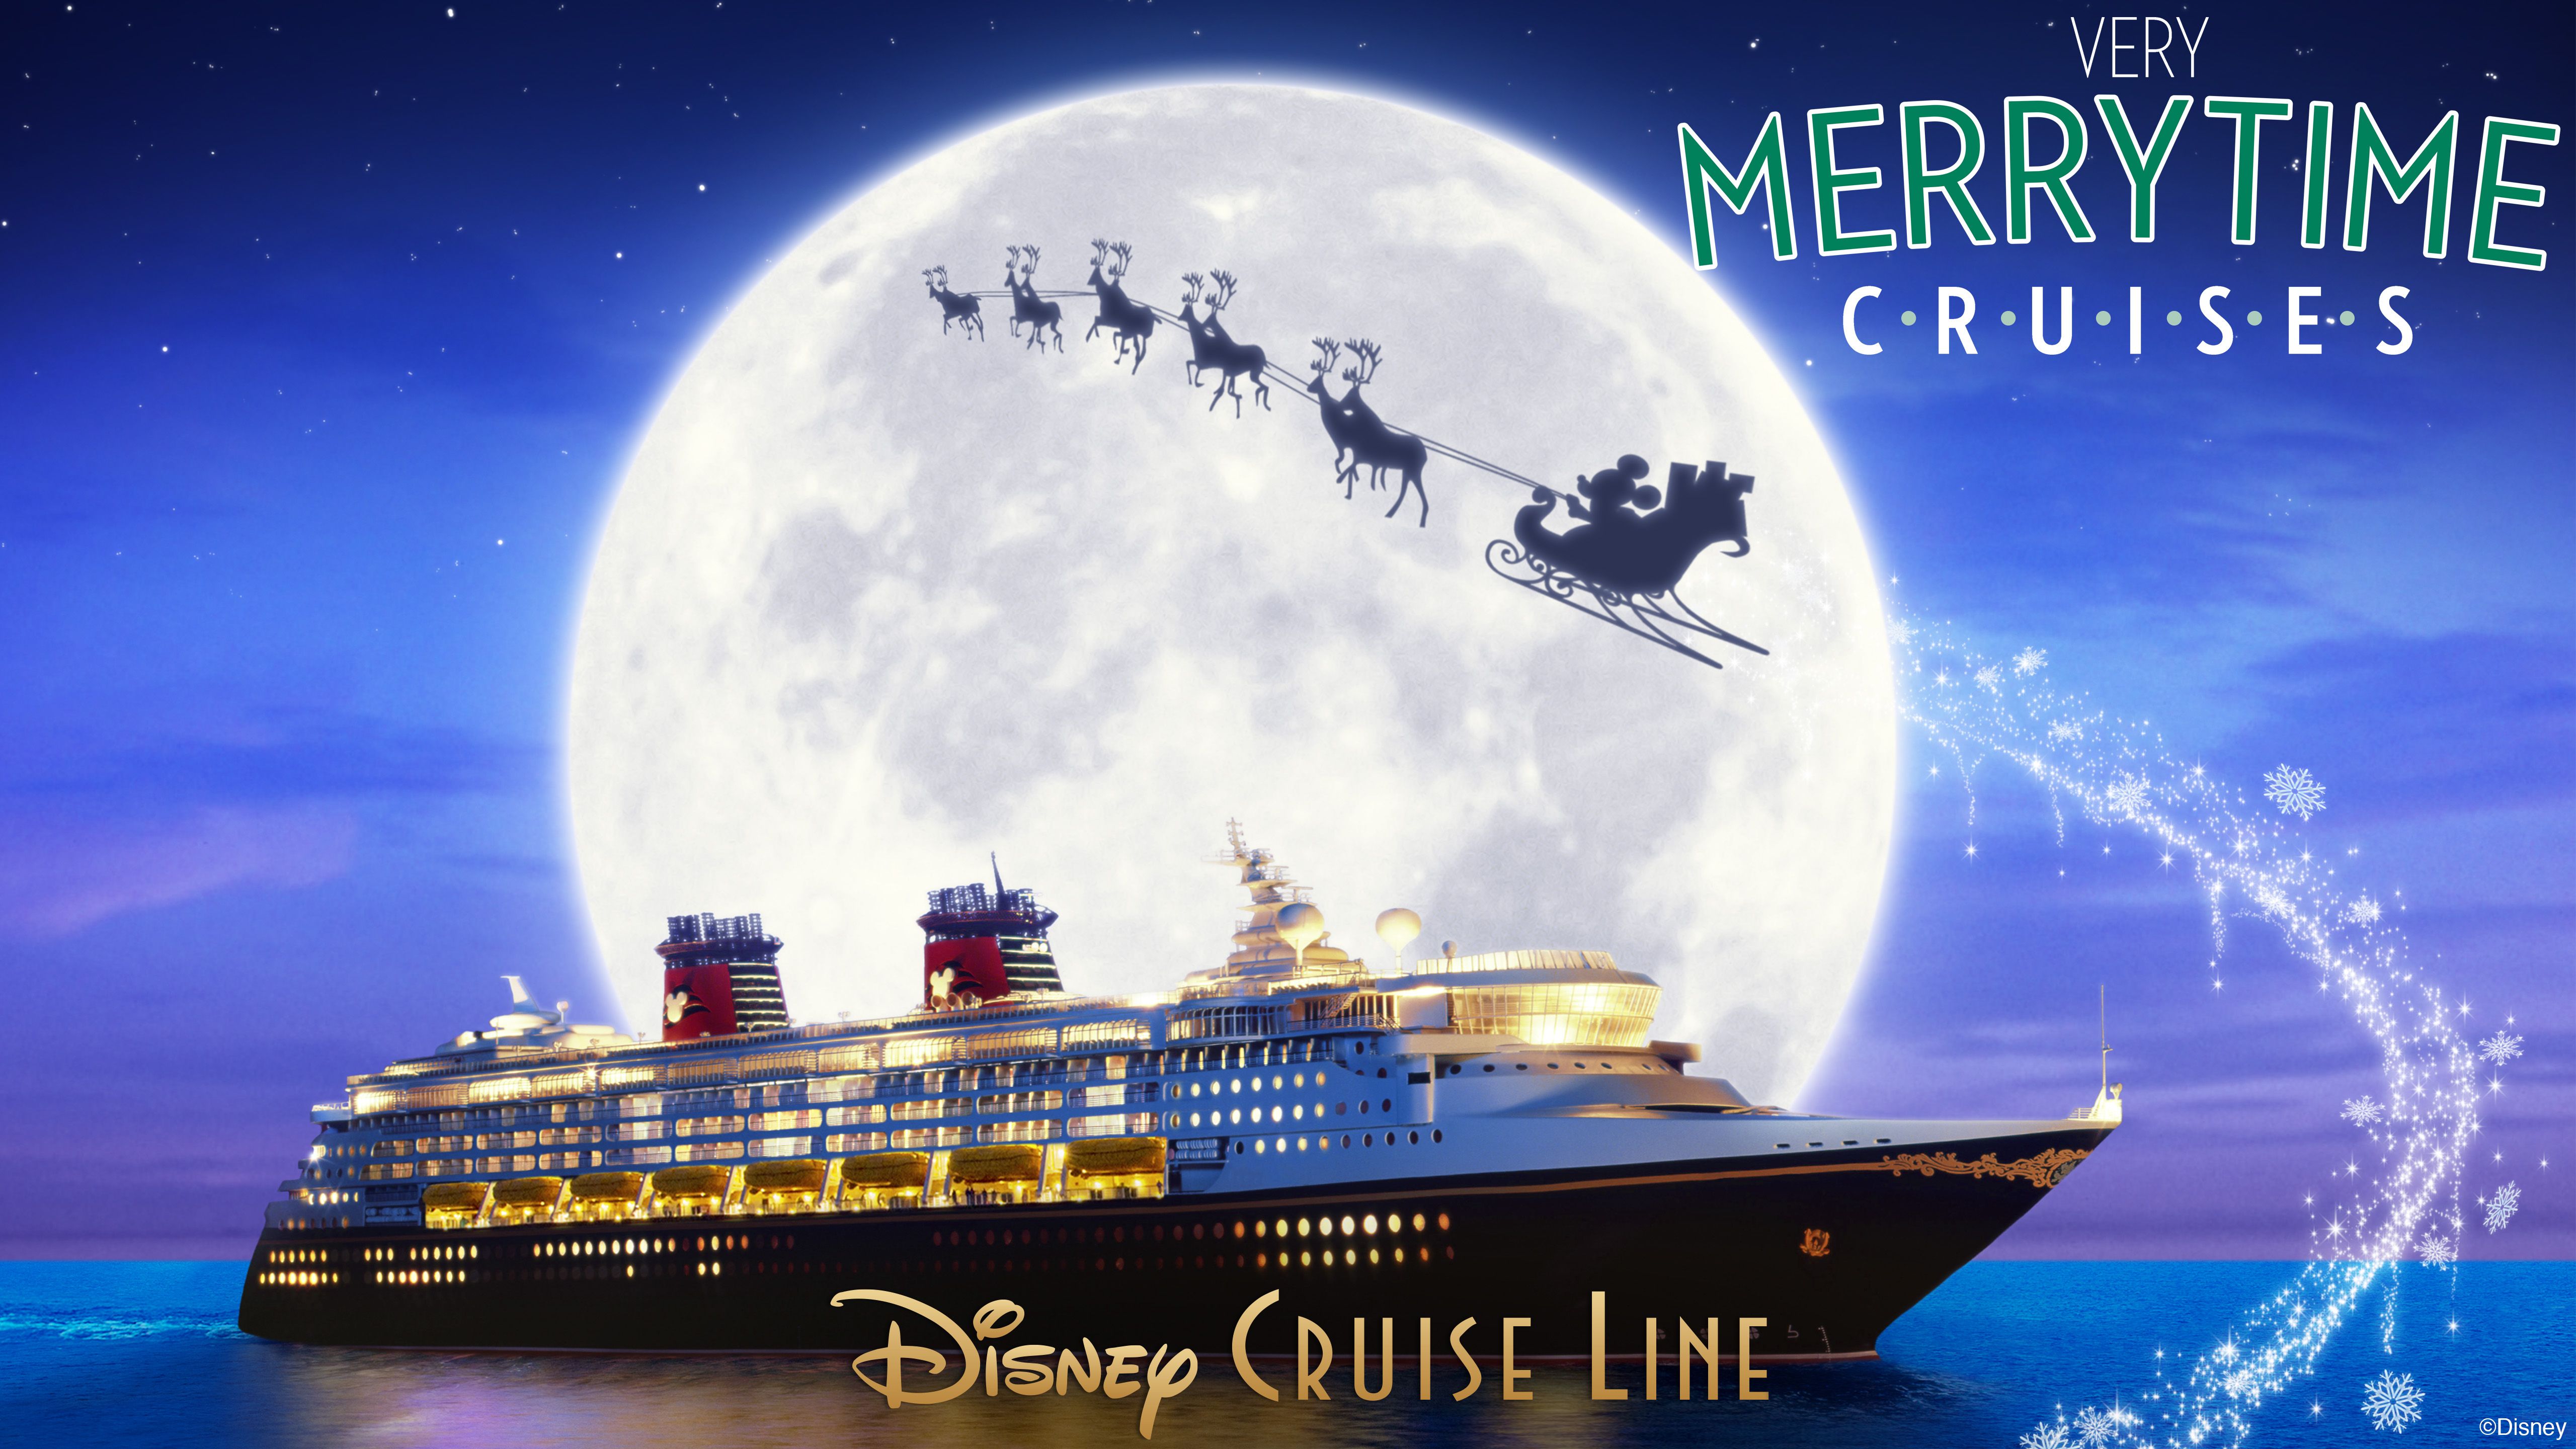 Disney Parks Blog Releases Desktop and Mobile Wallpaper for Very MerryTime Sailings • The Disney Cruise Line Blog